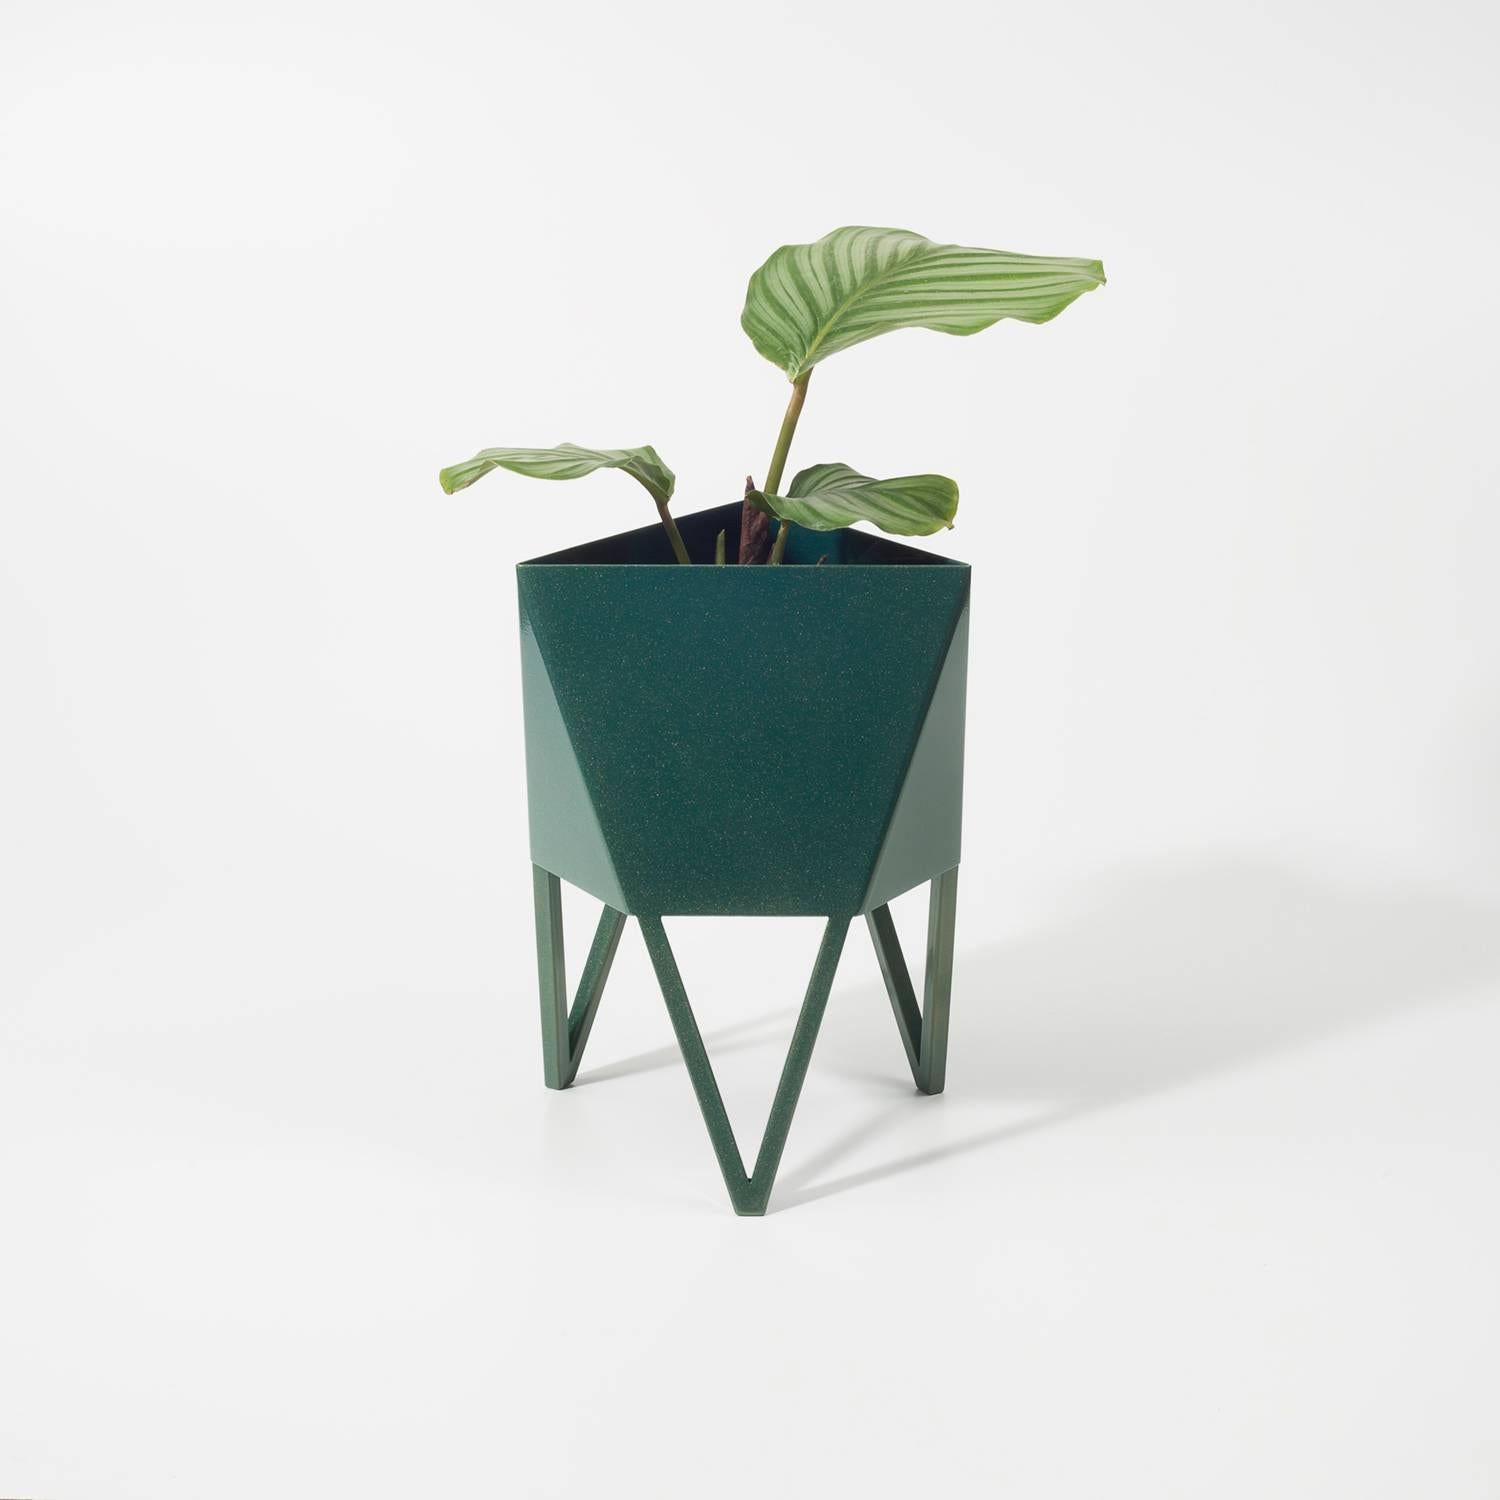 Deca Planter in Living Coral Steel, Large, by Force/Collide 1